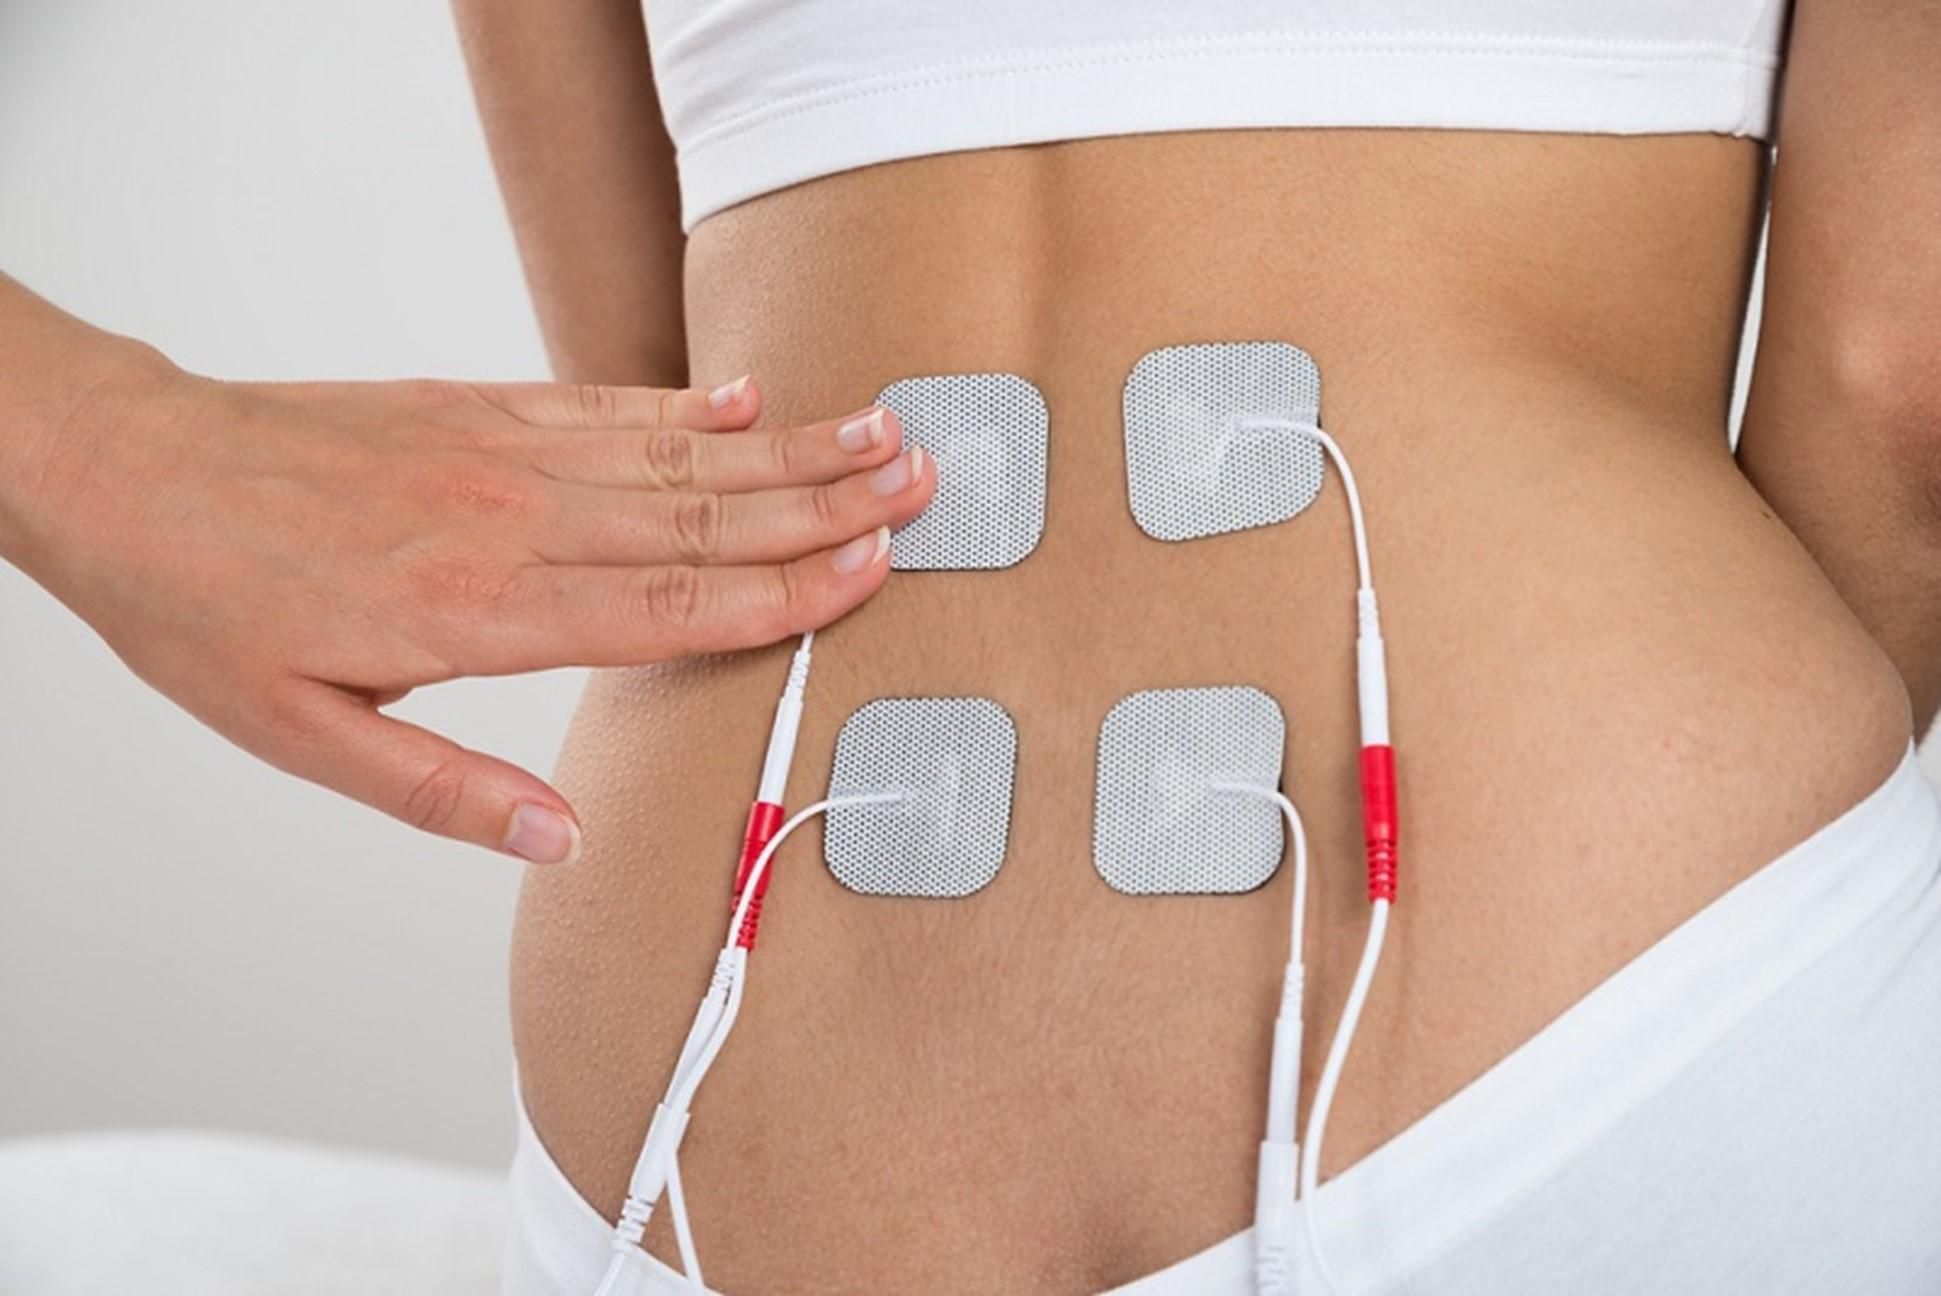 A Brief Introduction to The Tens Ems Electrode